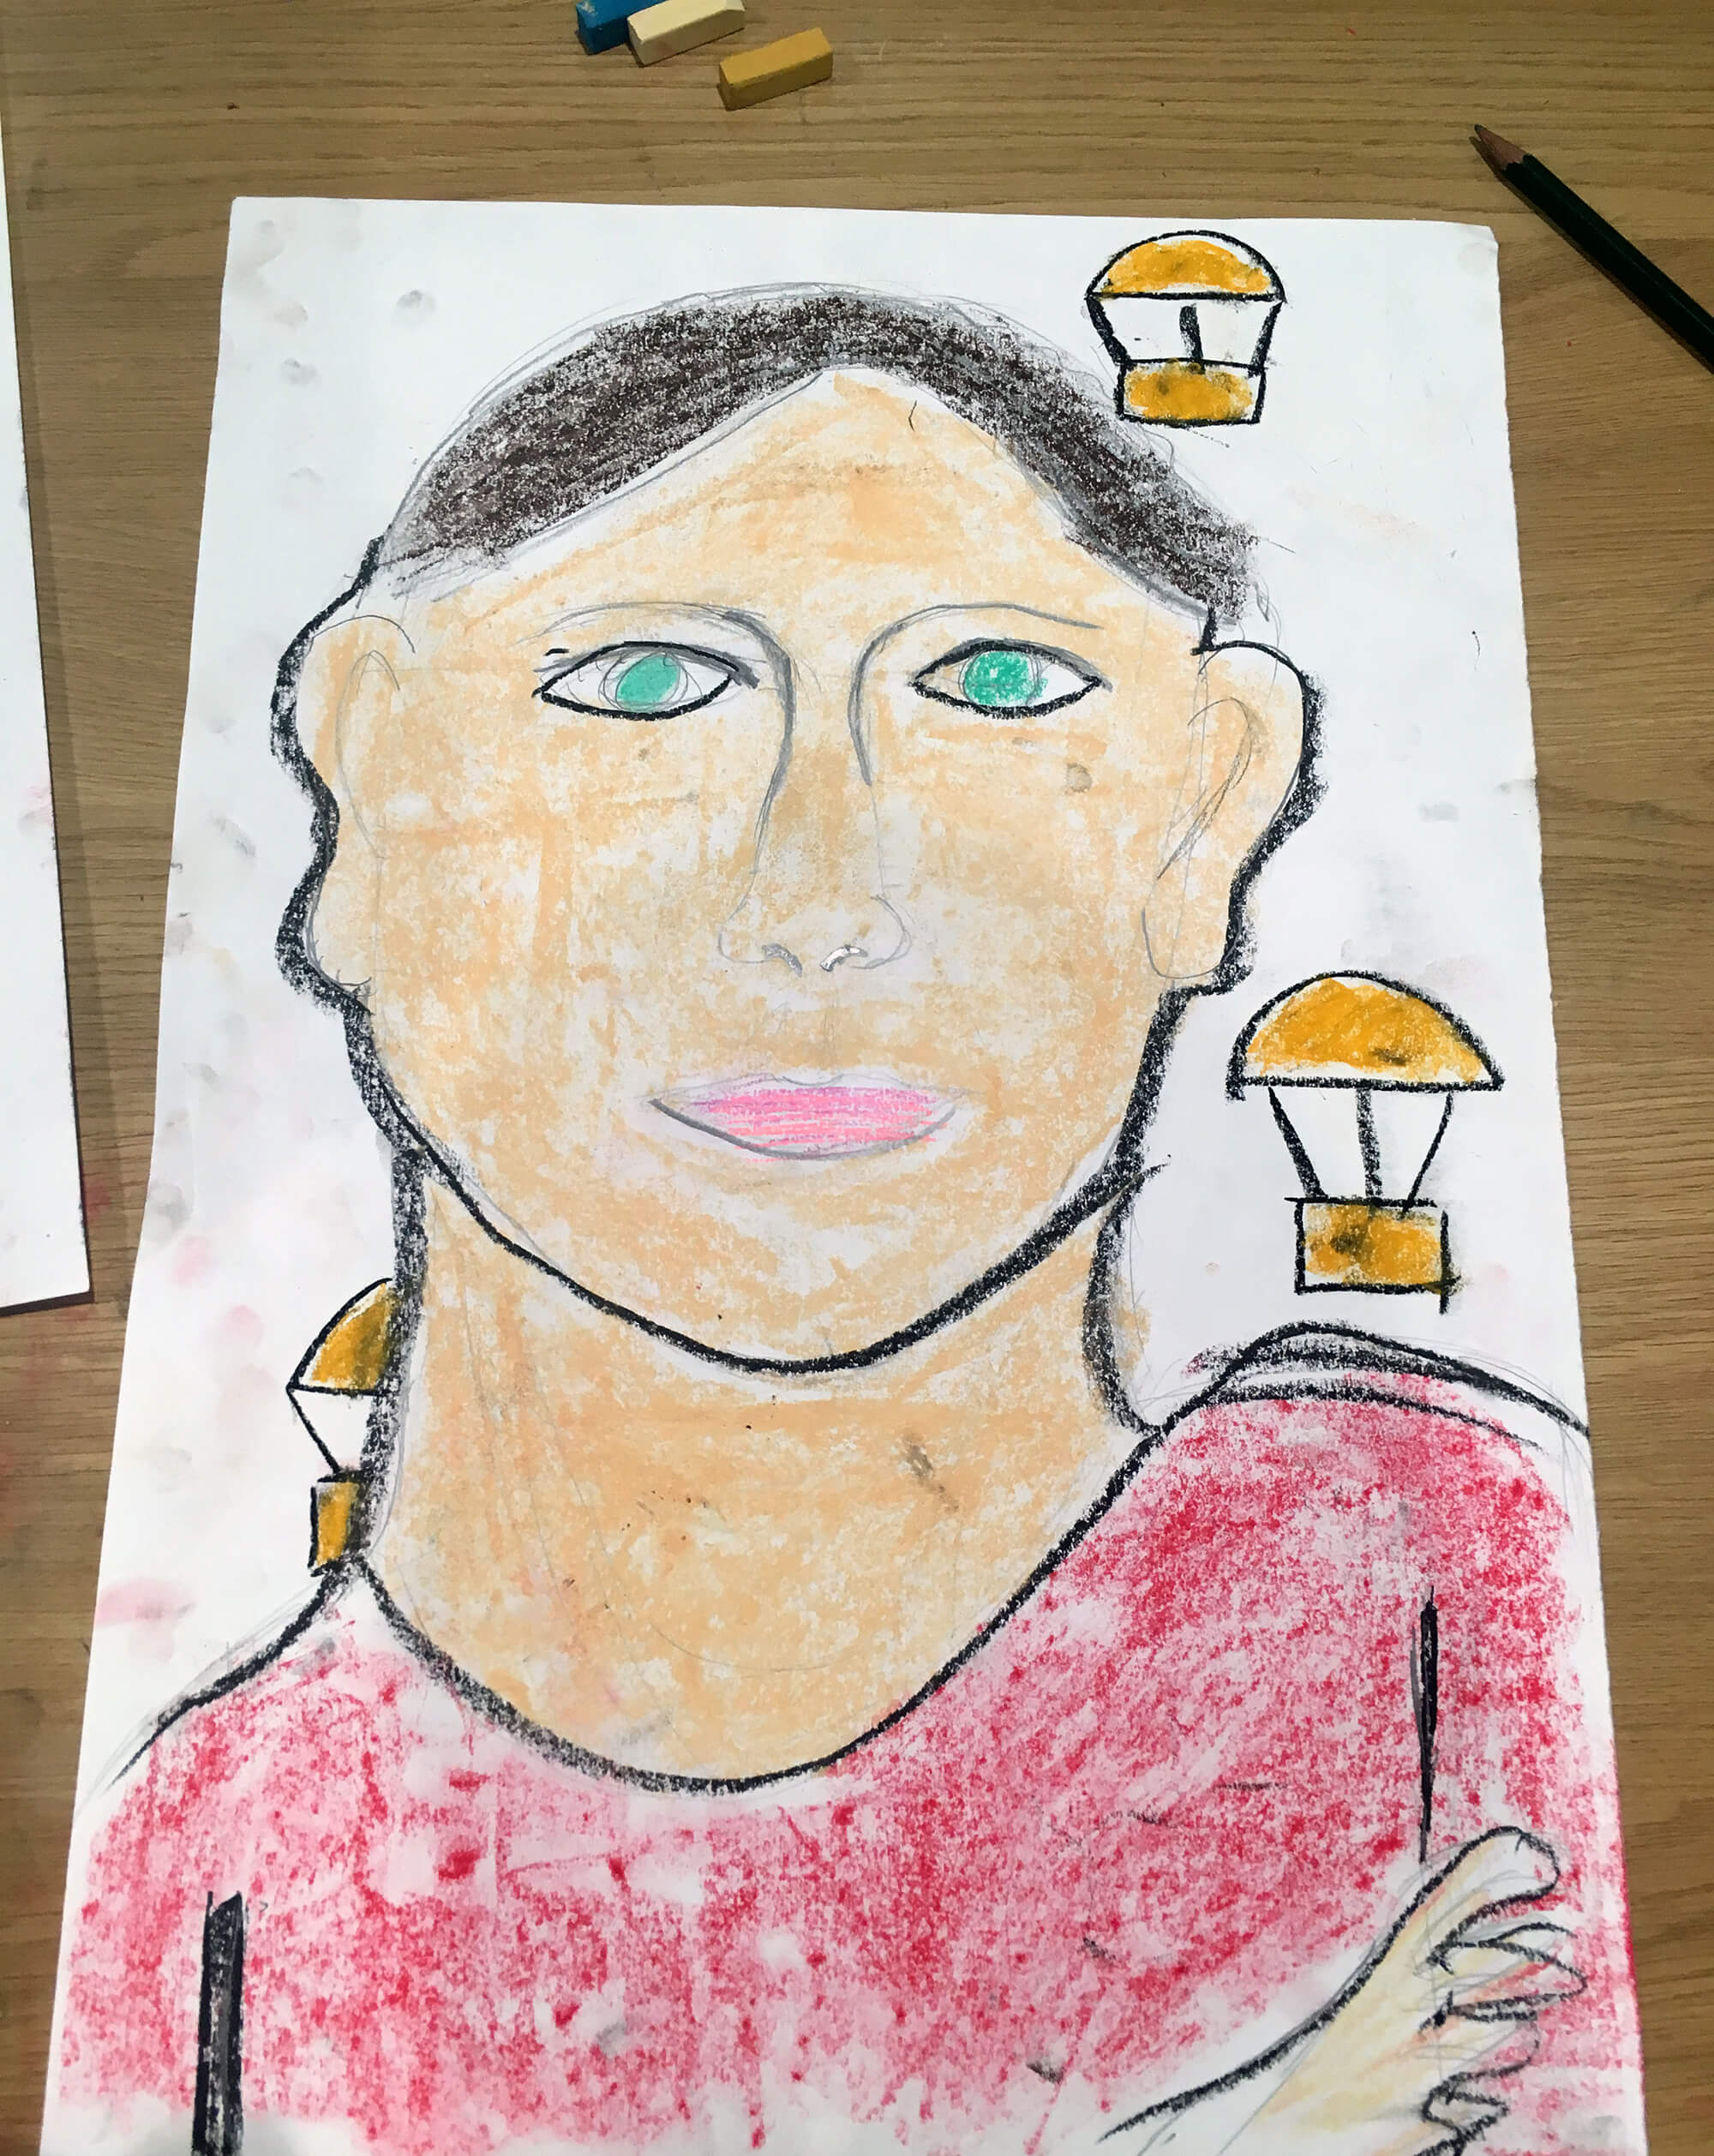 Magdalena by Milo, aged 10